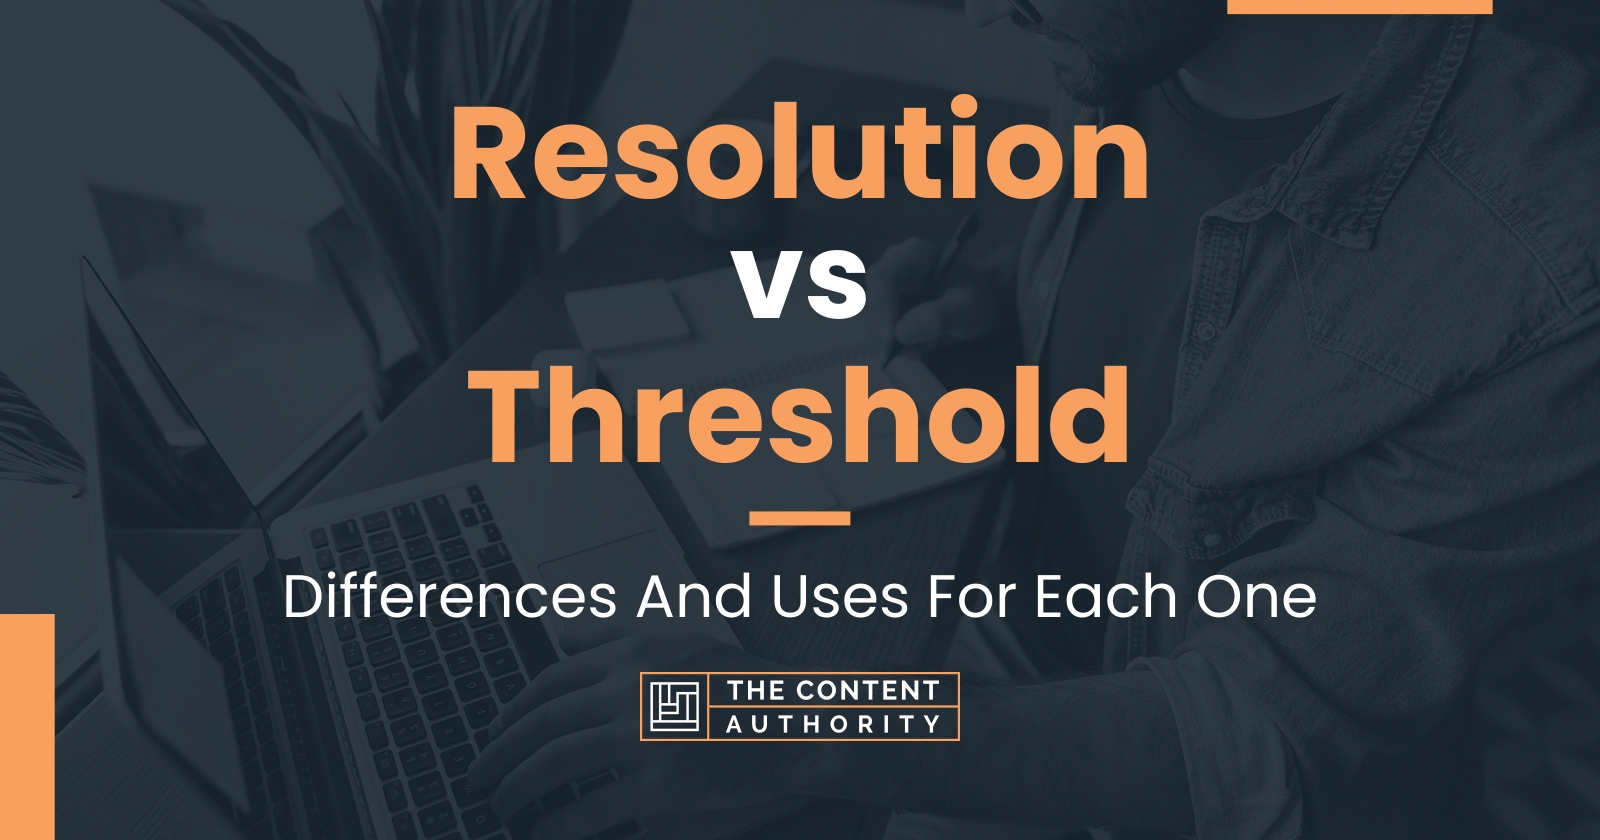 Resolution vs Threshold: Differences And Uses For Each One